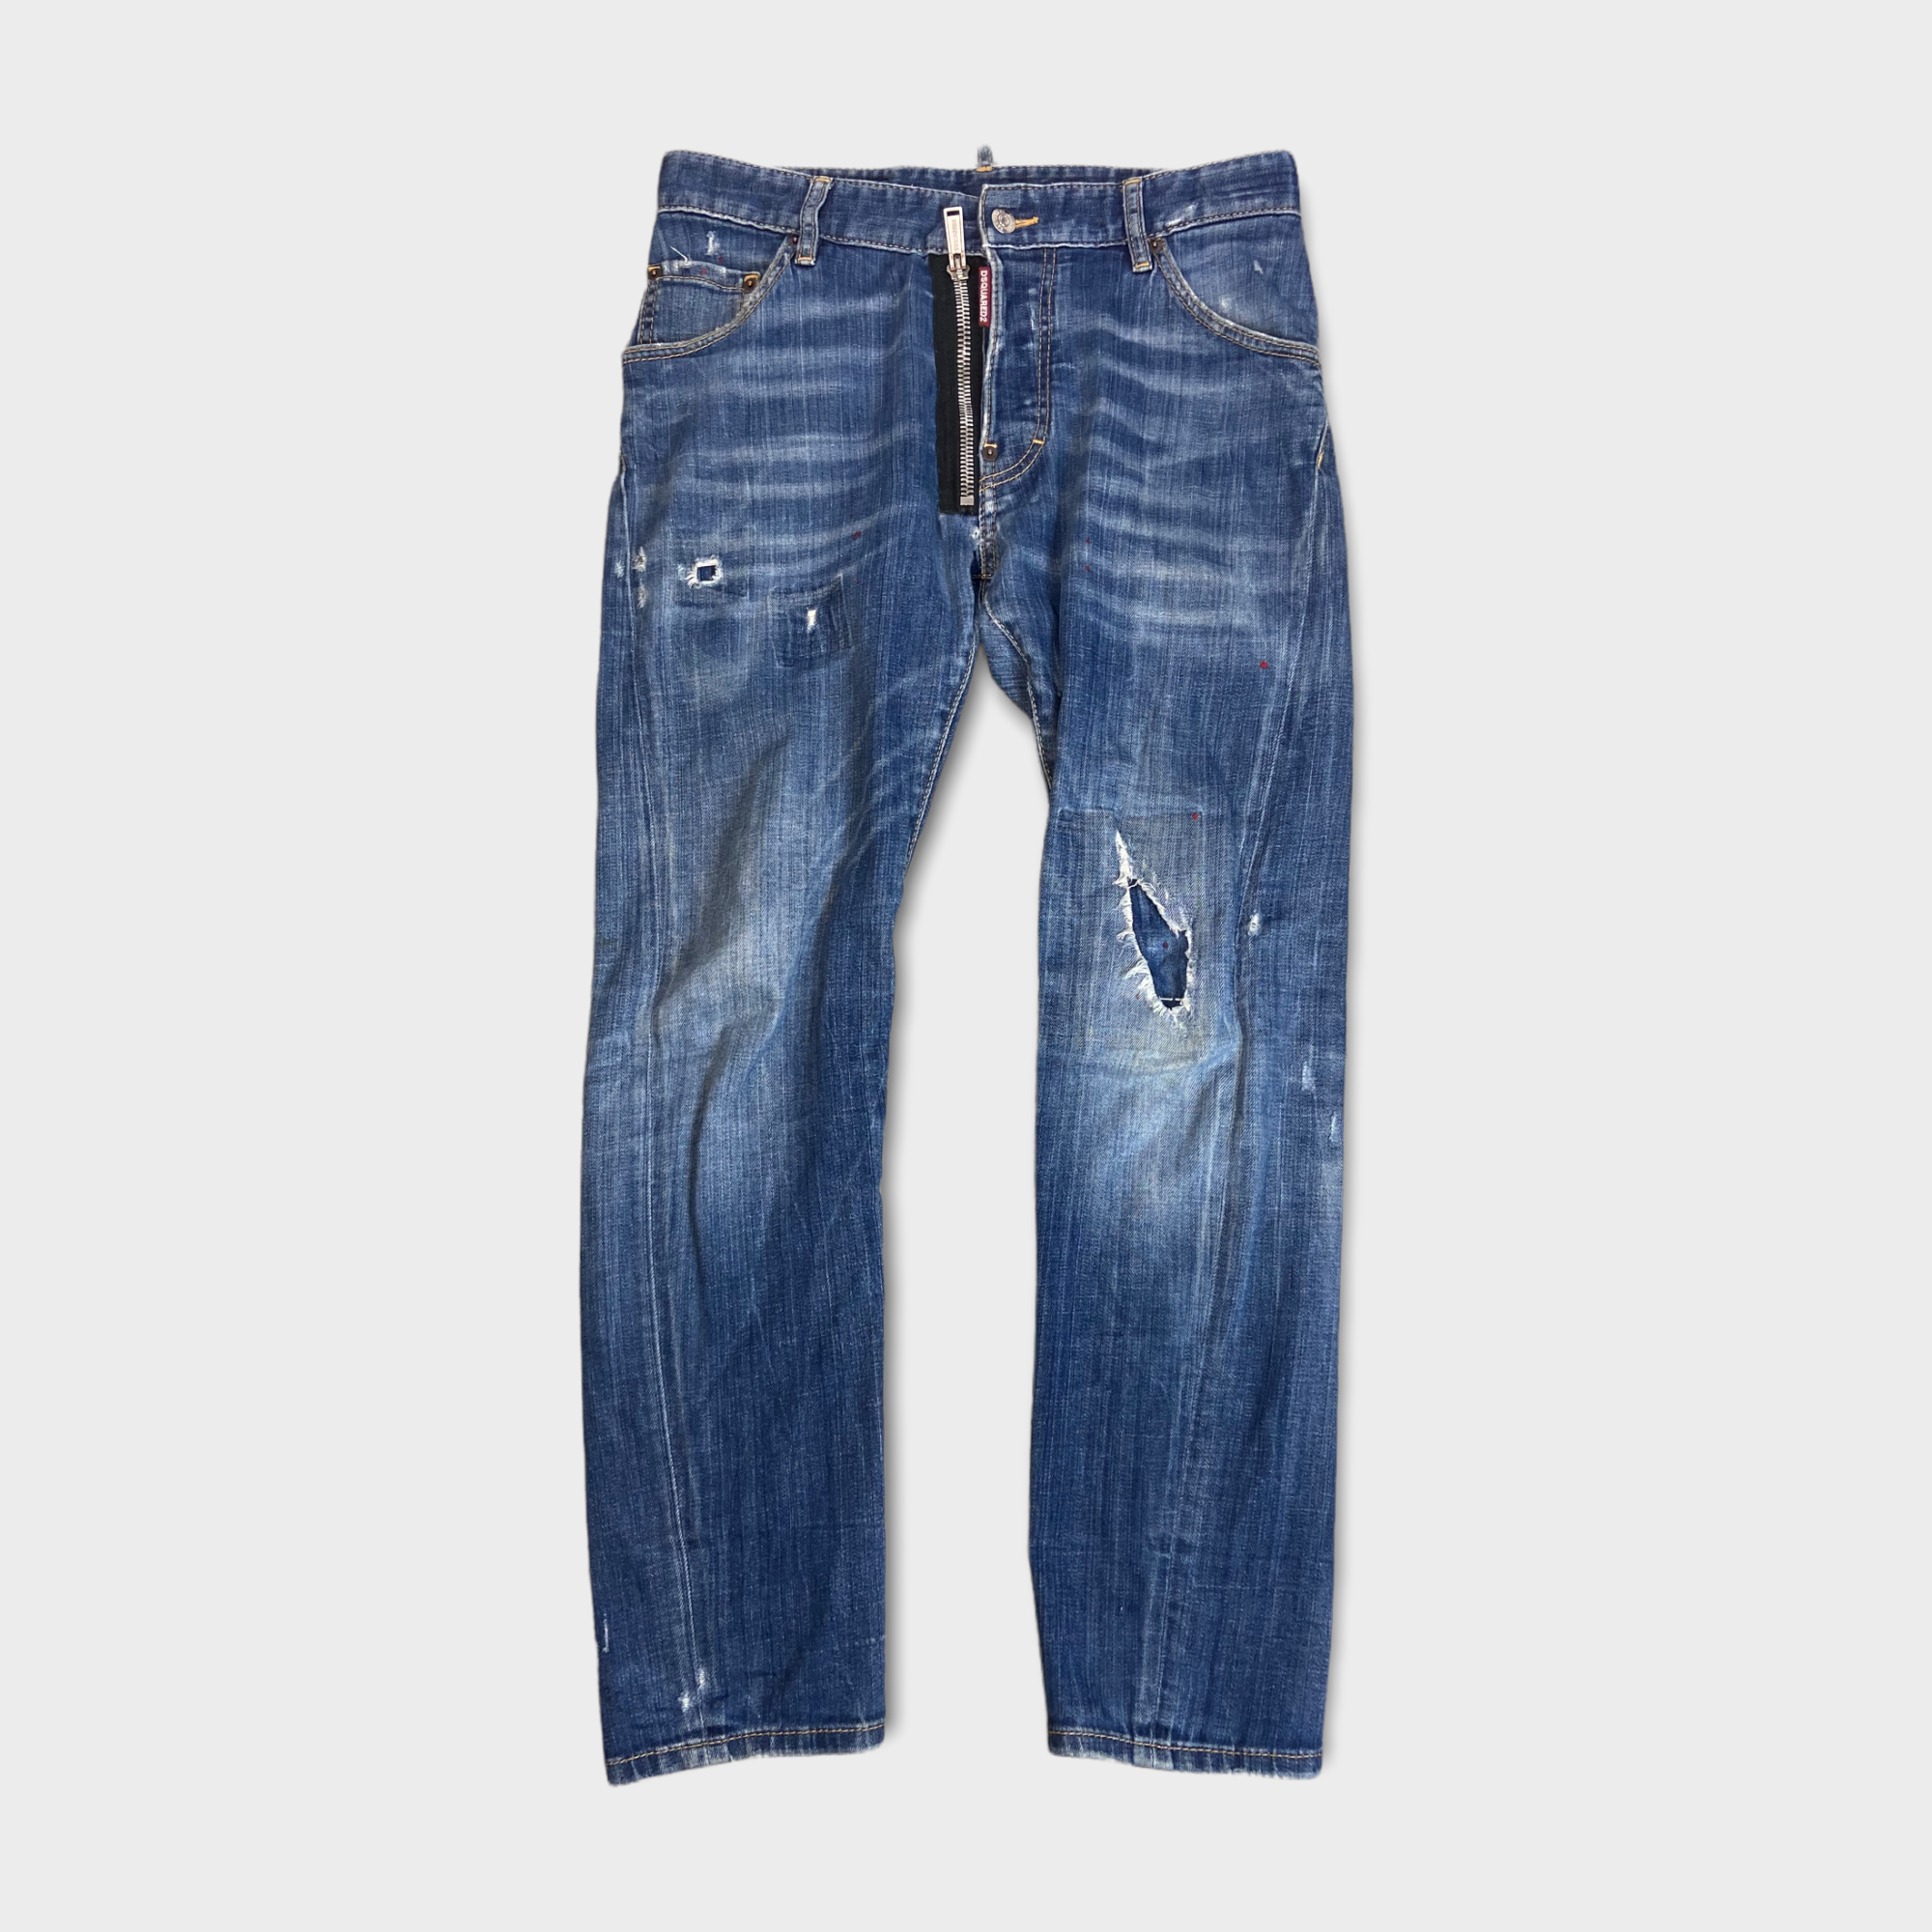 Dsquared2 Classic Kenny Jean - Size IT44 (XS)